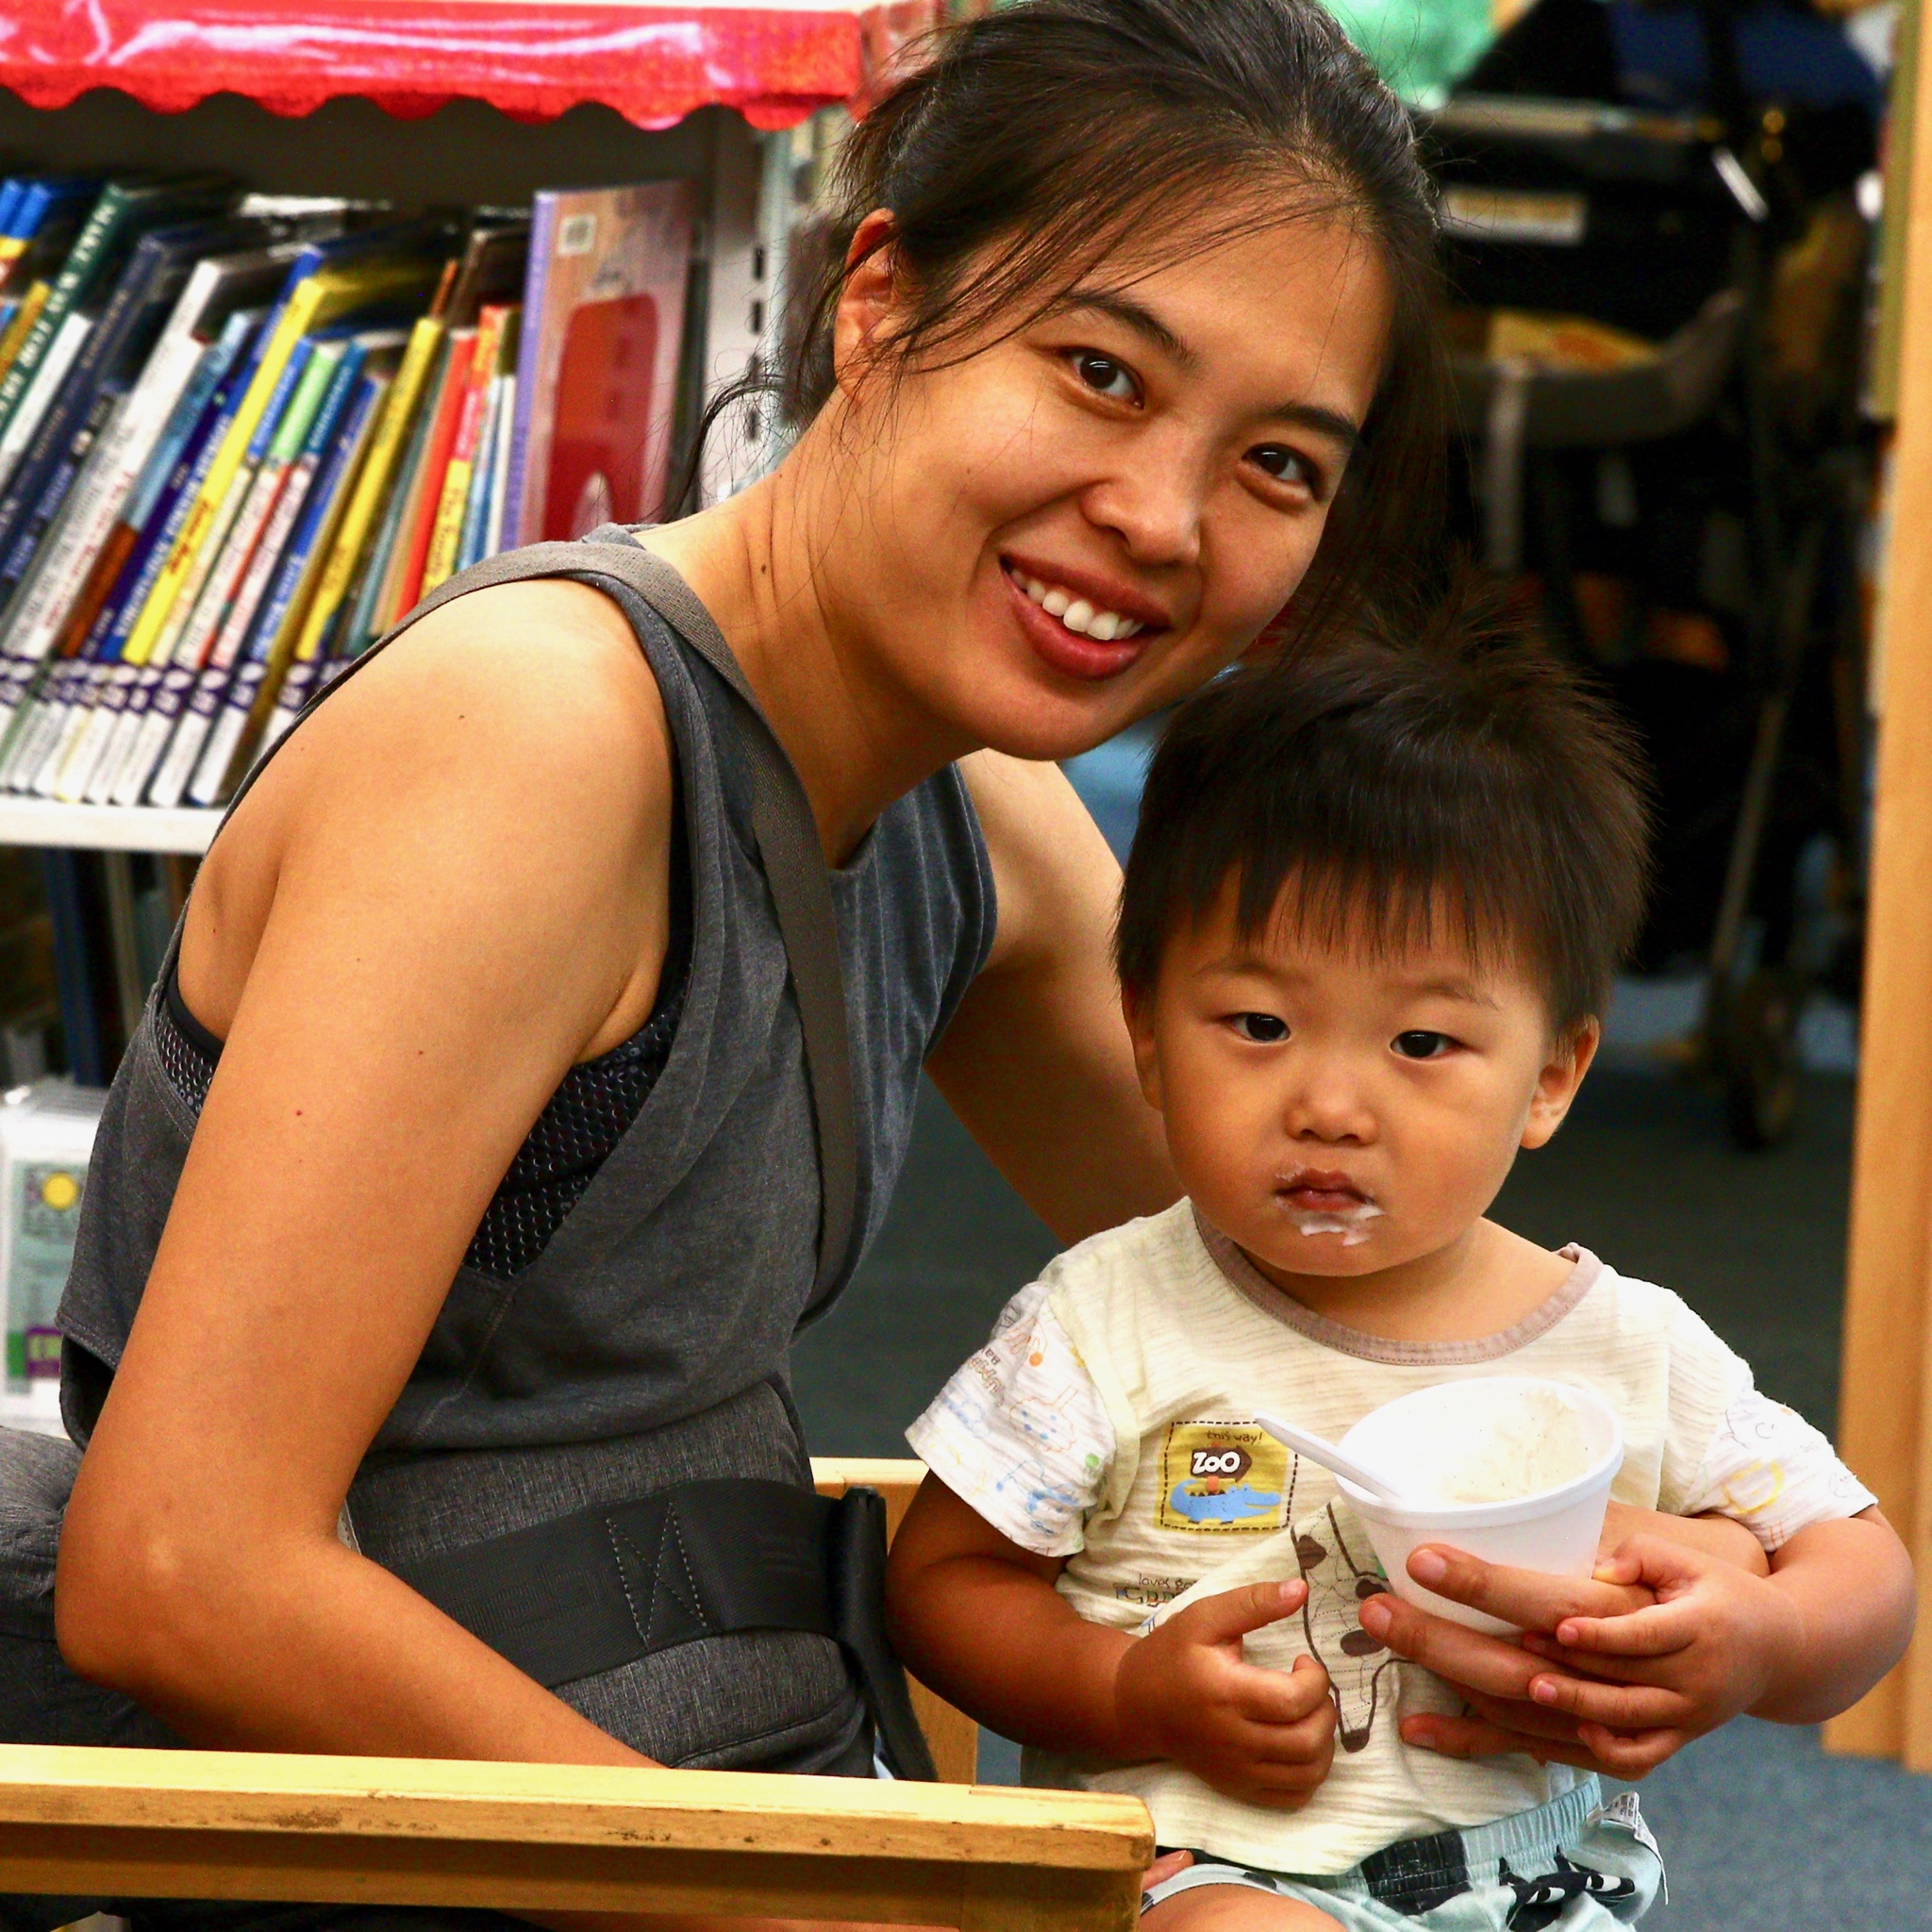 Mother and Child enjoy ice cream in the library